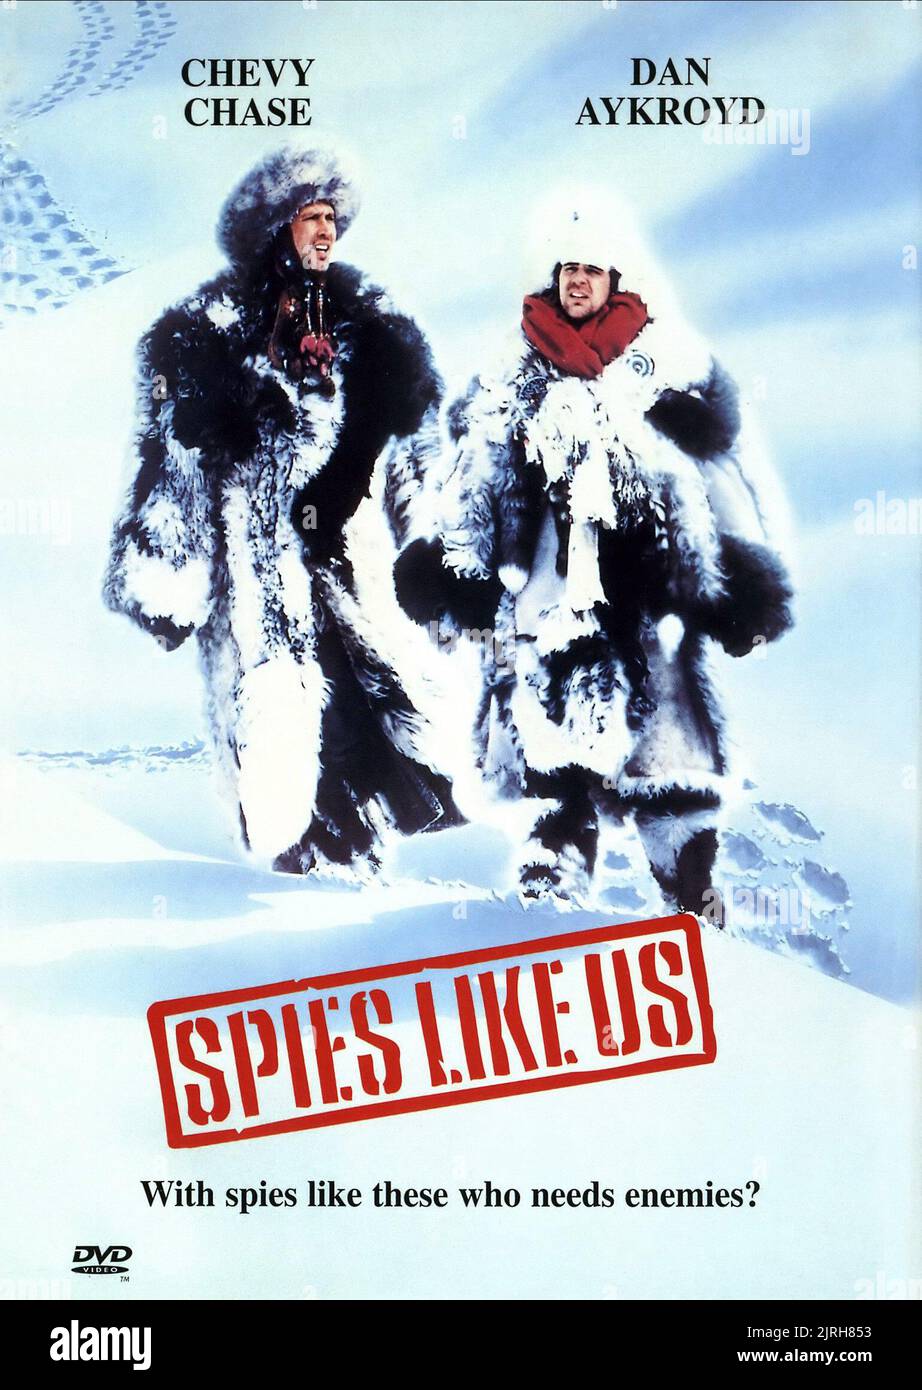 CHEVY CHASE, DAN AYKROYD POSTER, SPIES LIKE US, 1985 Stock Photo